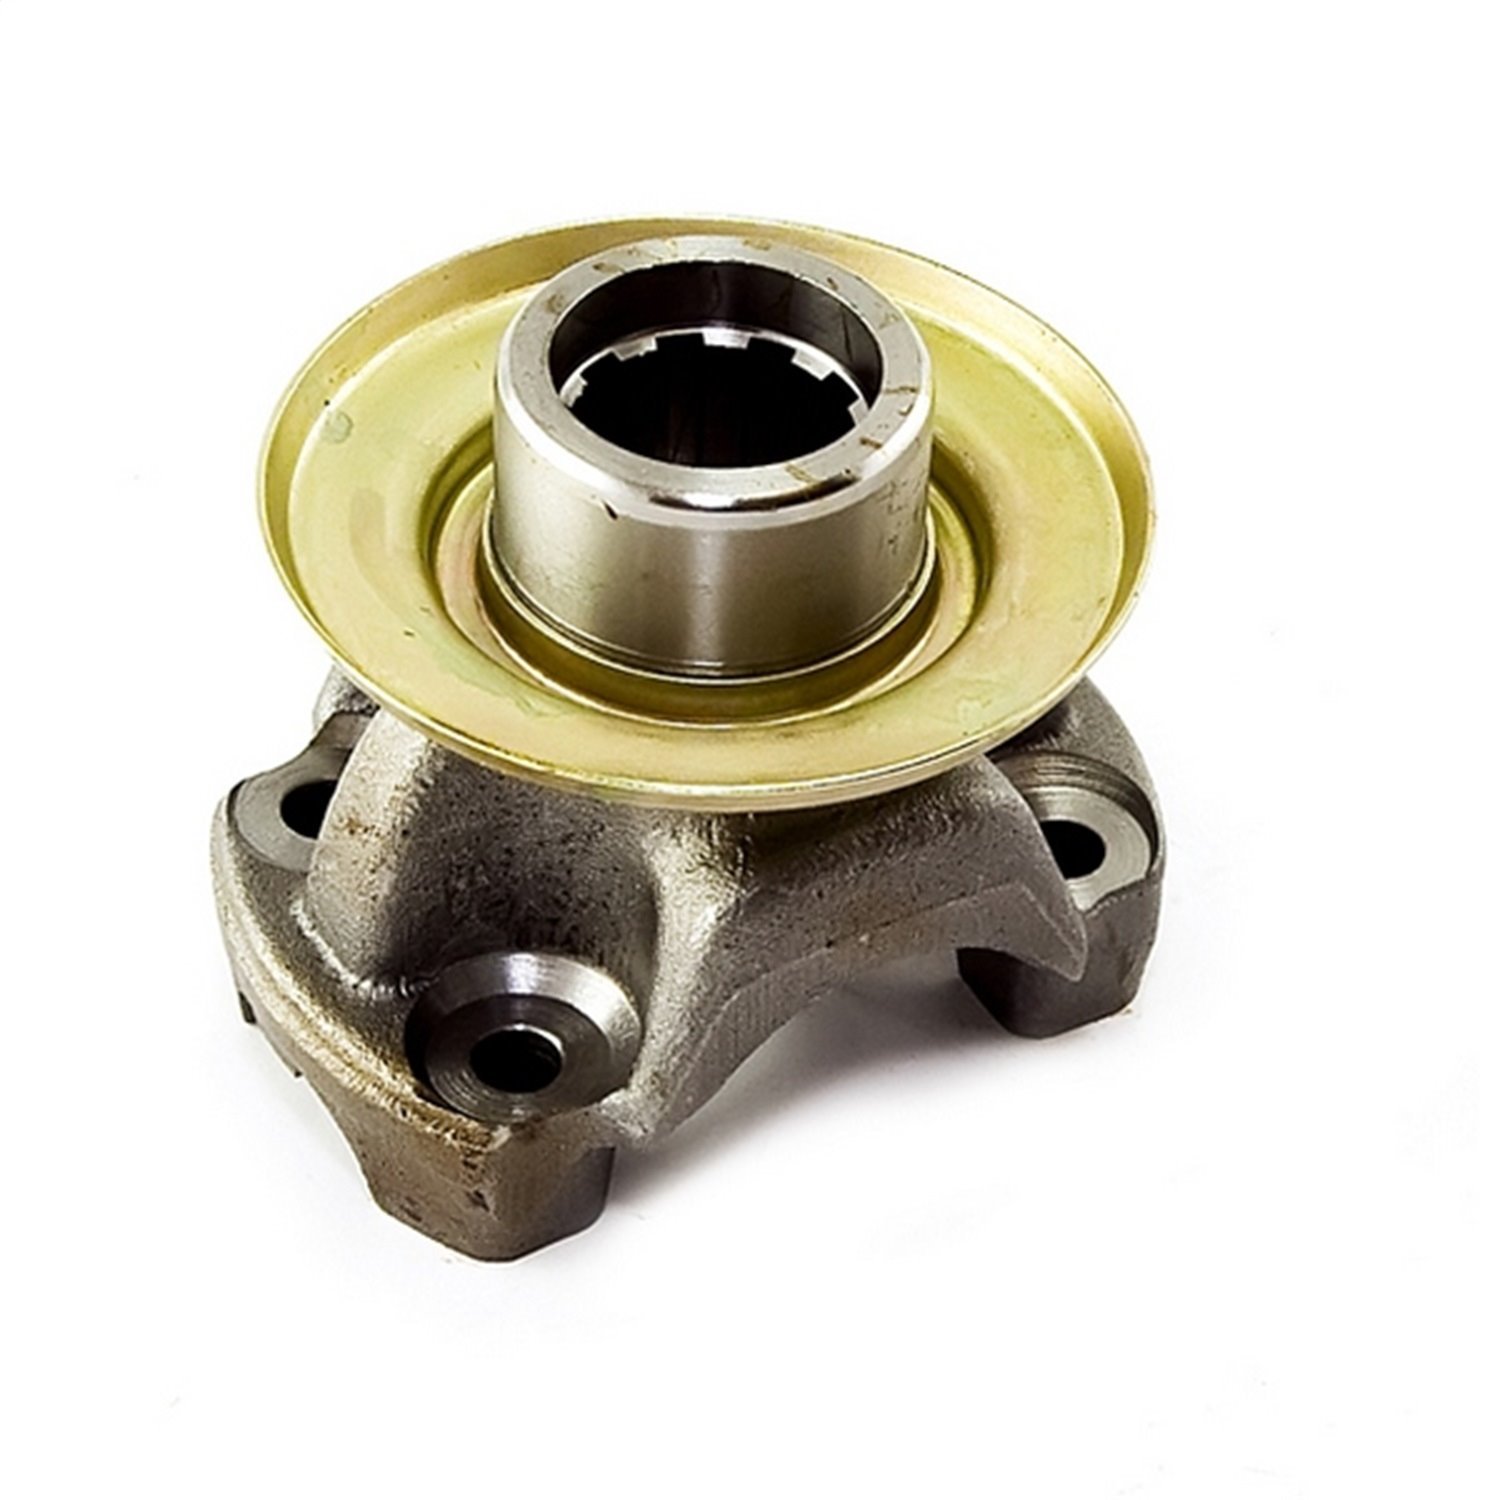 Replacement 10-spline front output shaft yoke from Omix-ADA,